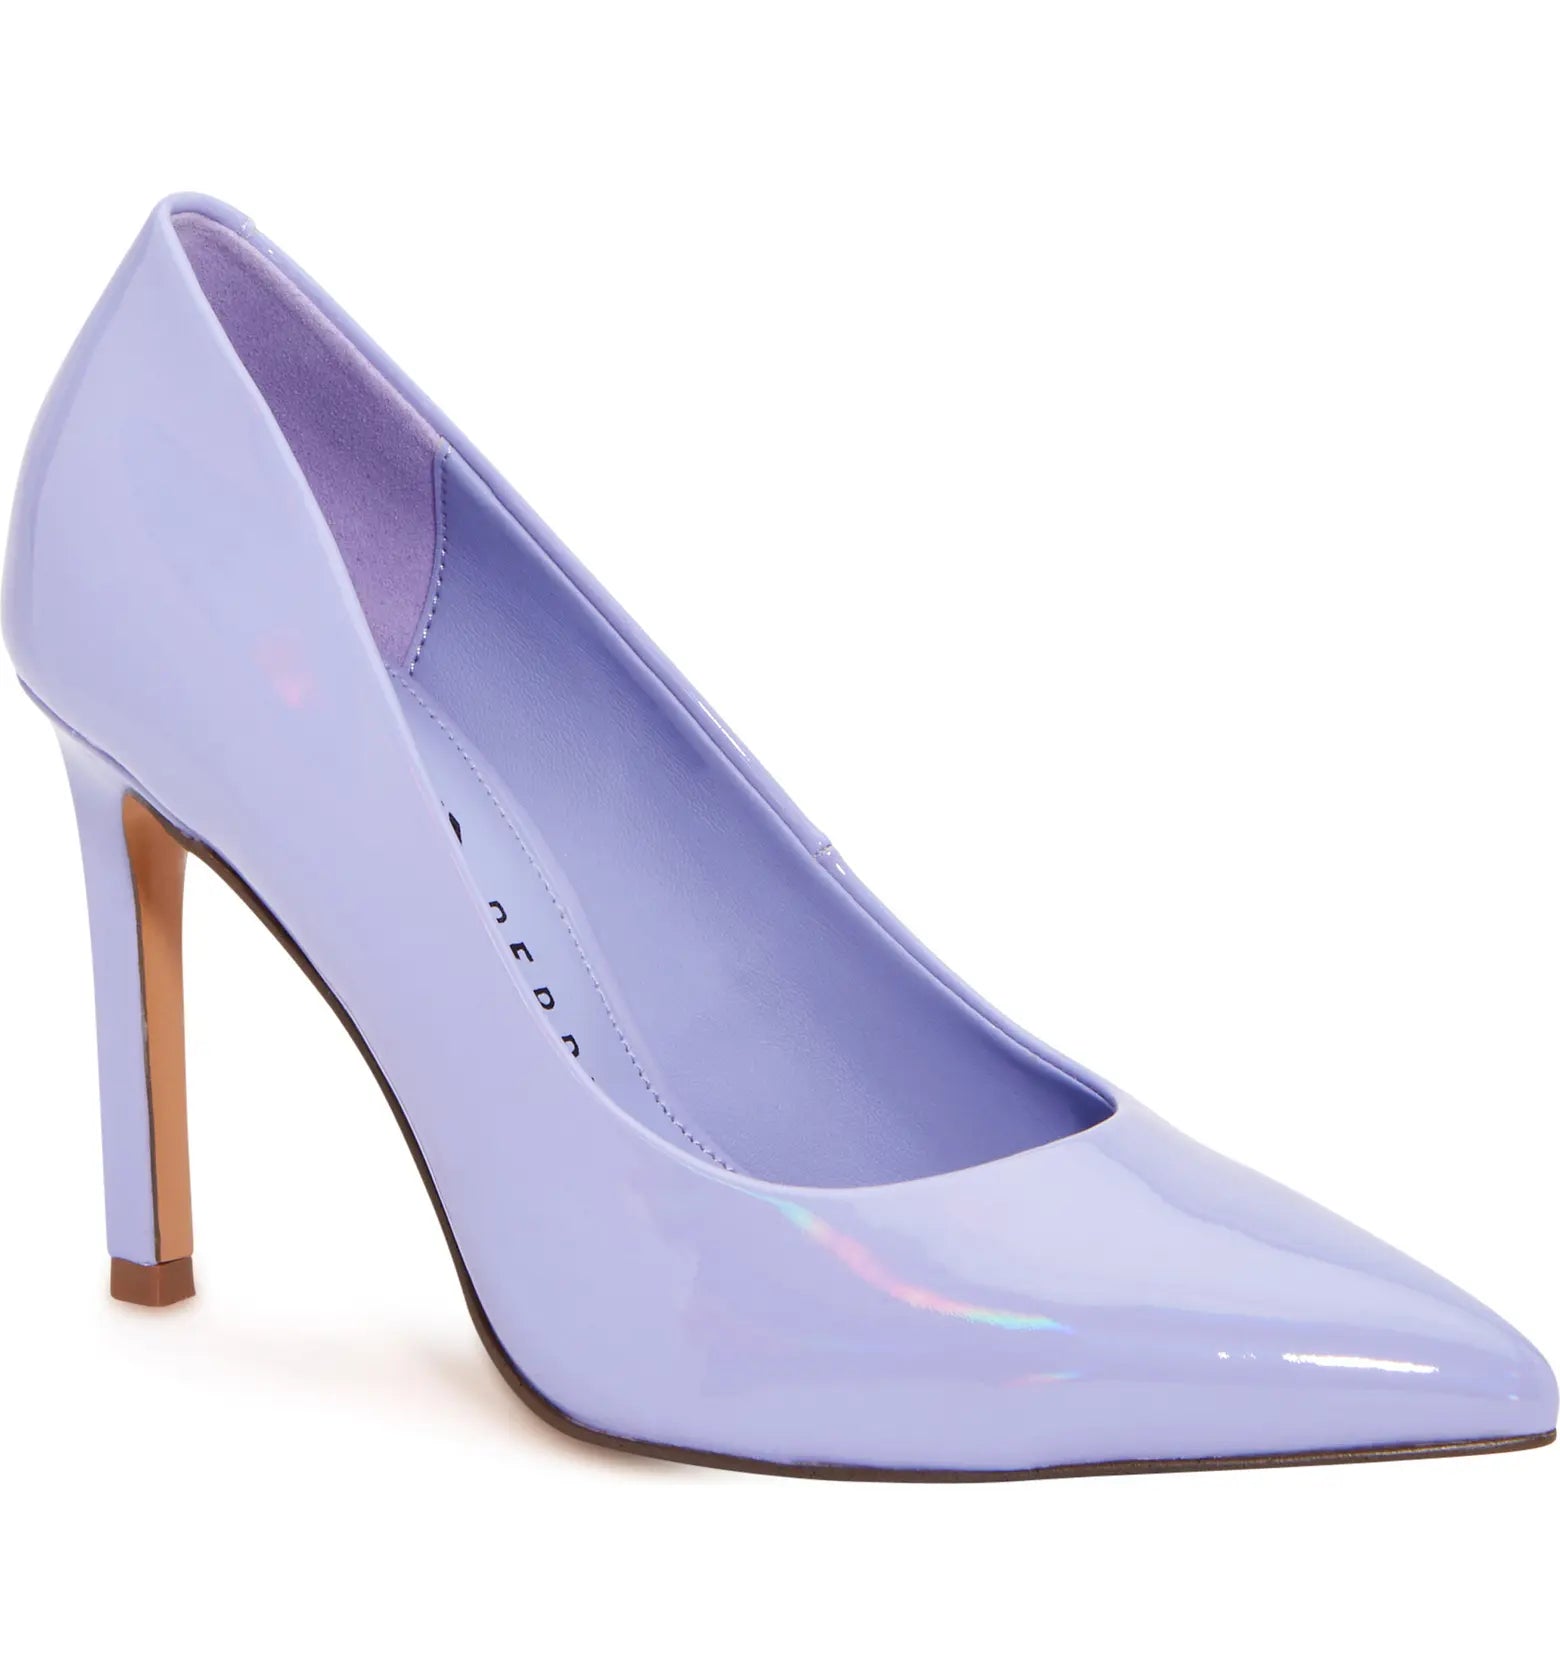 KATY PERRY LILAC PATENT LEATHER CARAMEL POINTED TOE PUMP